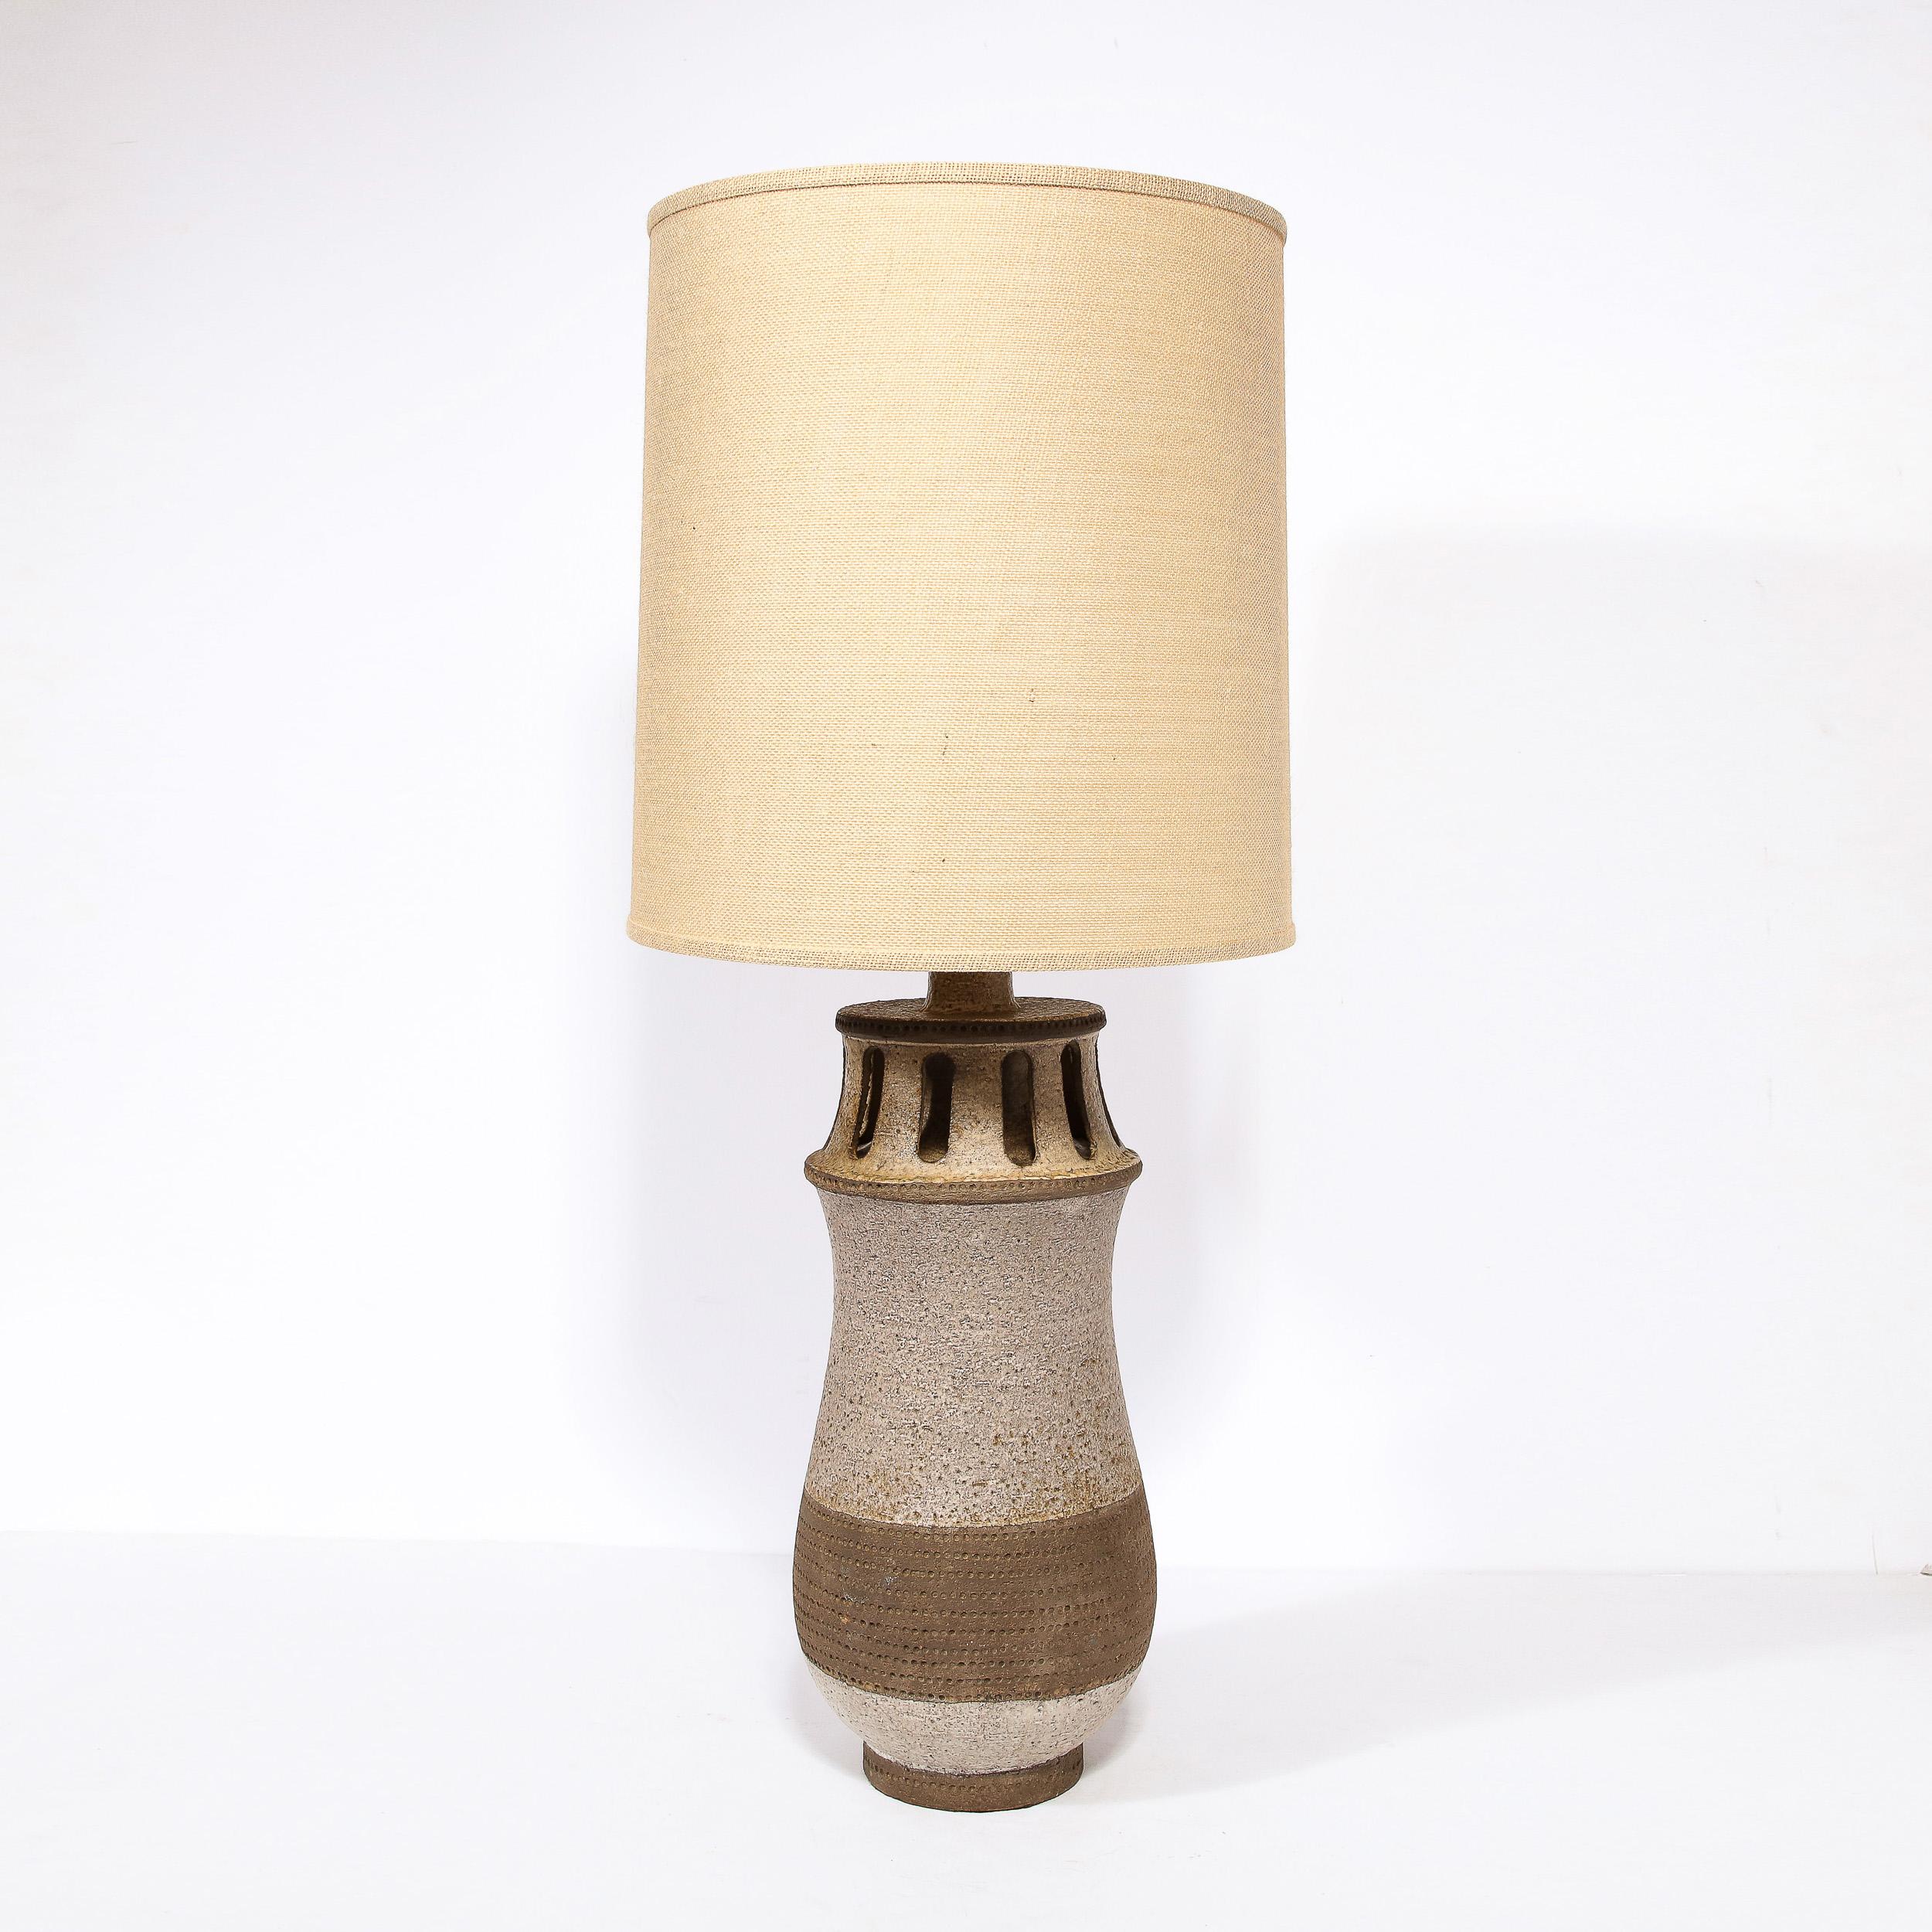 Mid-Century Modern Ceramic Table Lamp w/ Arcade Detailing and Raw Fiber Shade In Excellent Condition For Sale In New York, NY